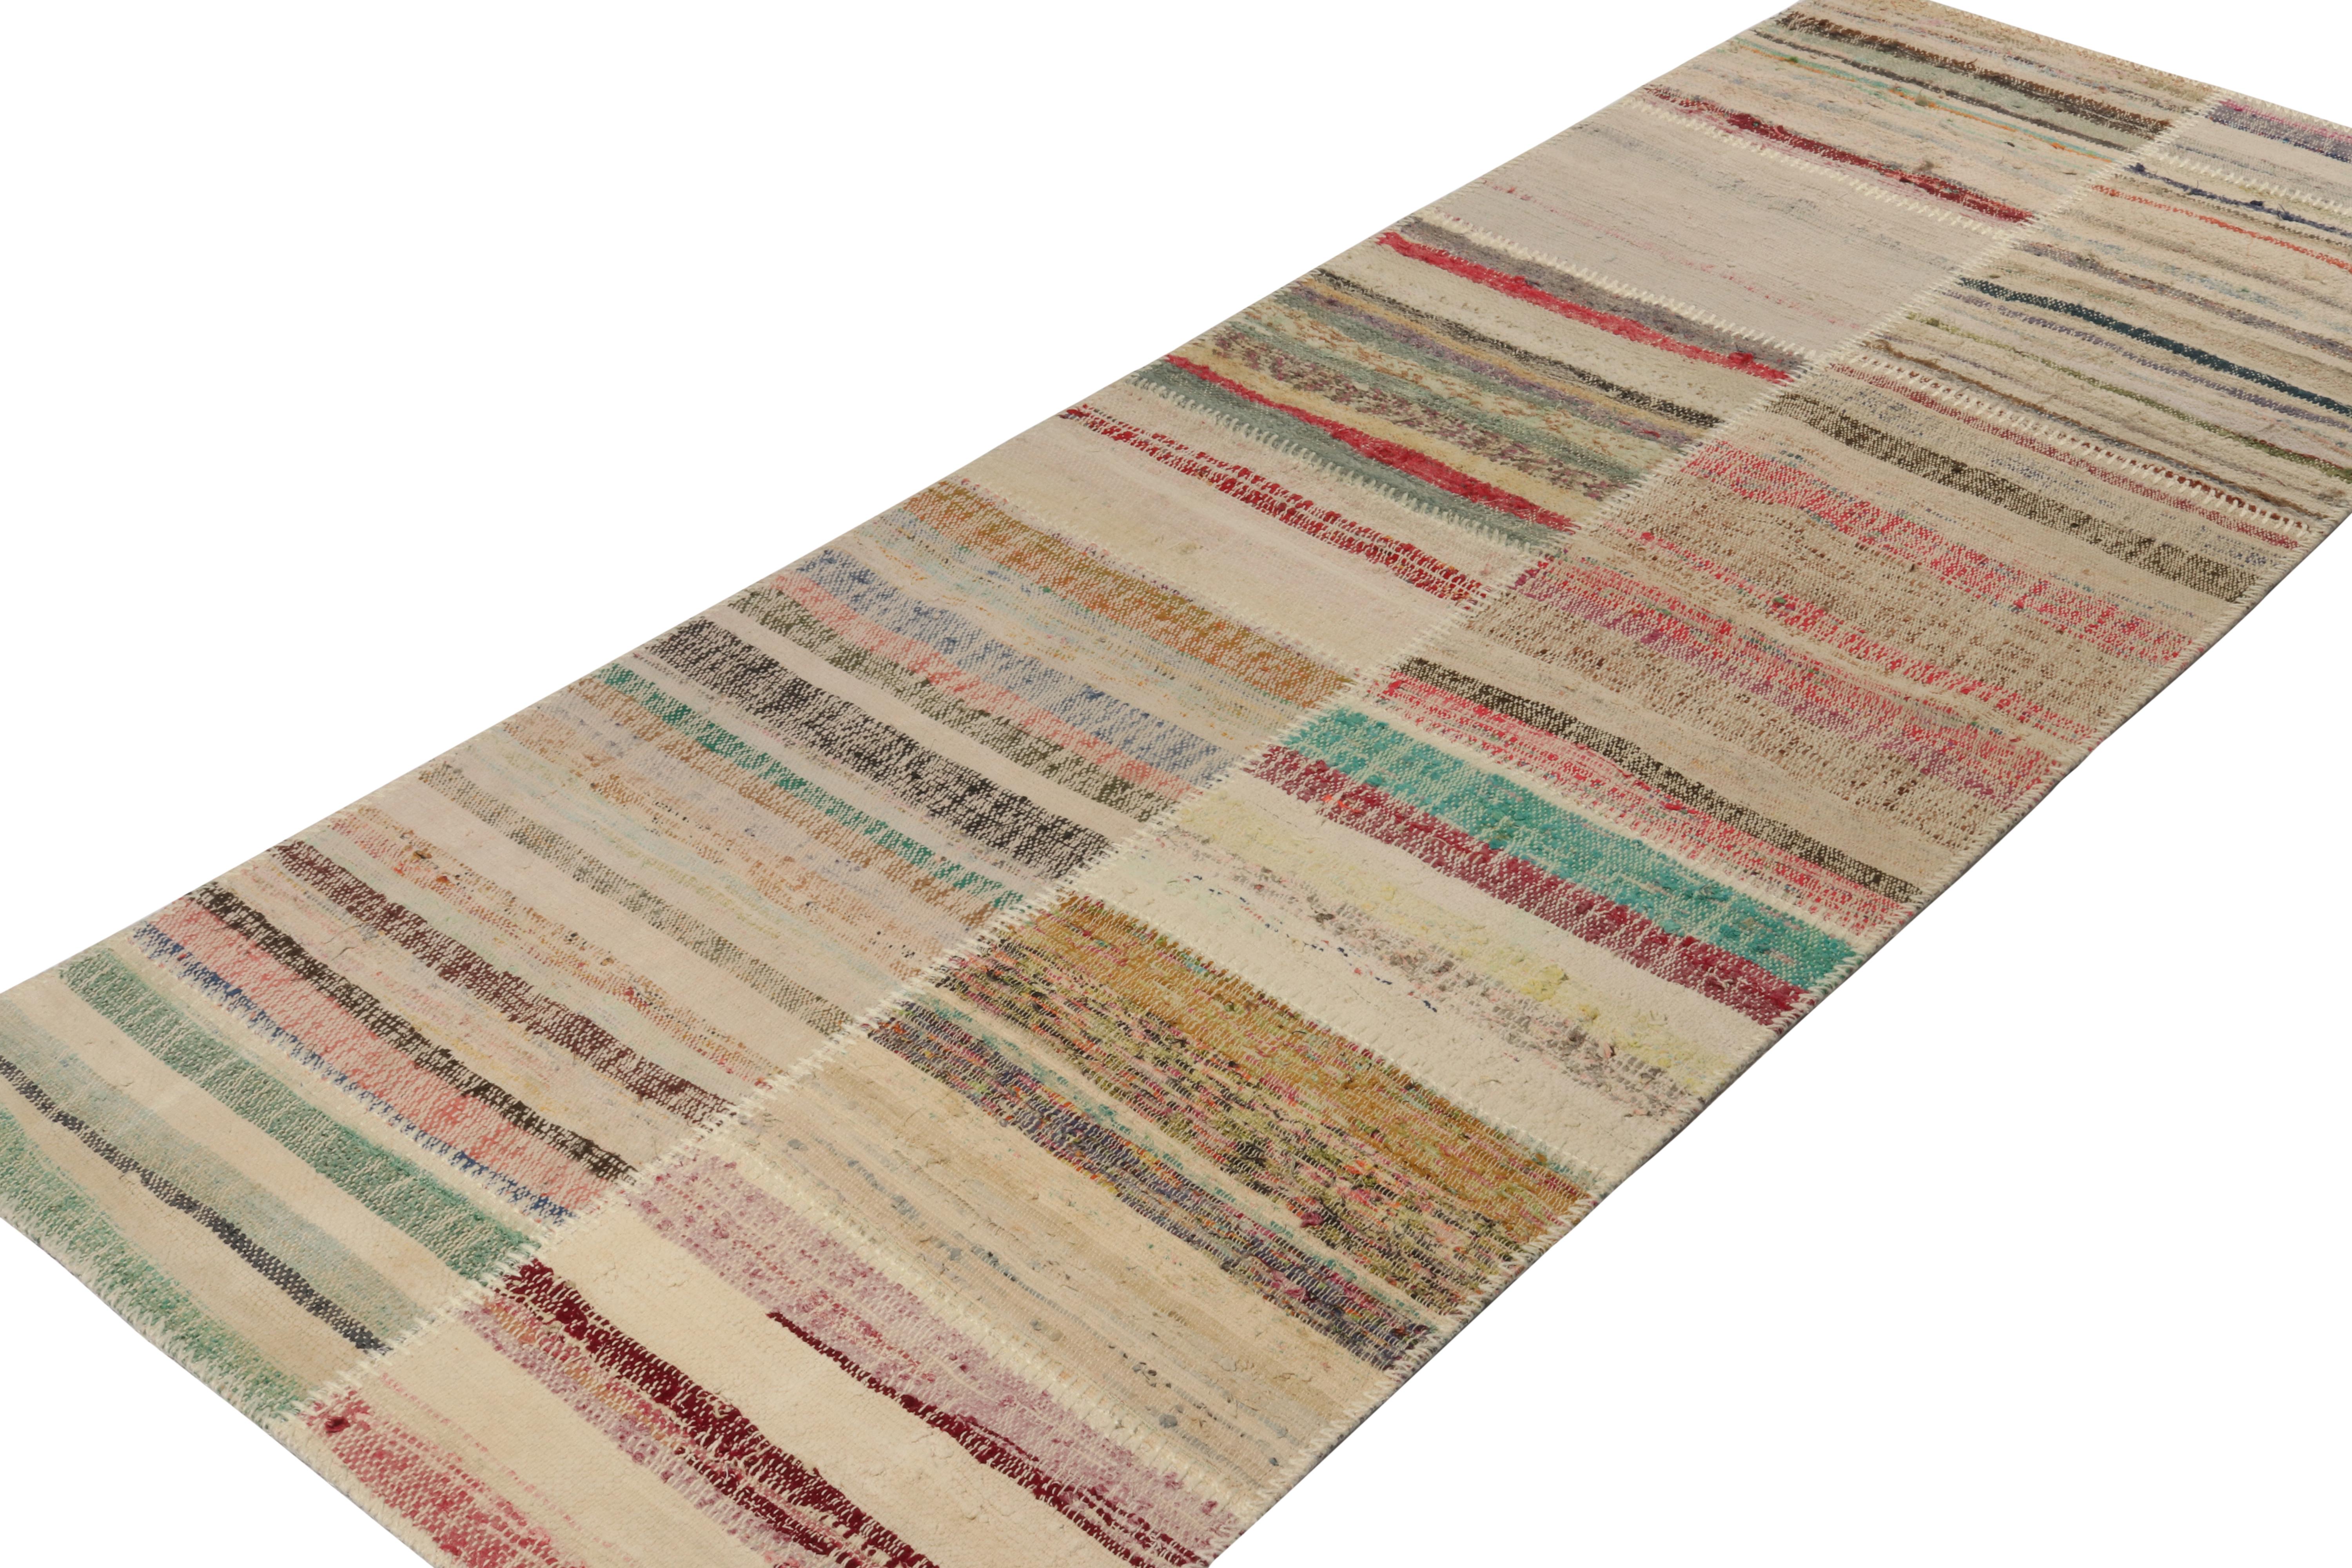 Handwoven in wool, Rug & Kilim presents a 3x8 contemporary runner from their innovative new patchwork kilim collection. 

On the Design: 

This flat weave technique repurposes vintage yarns in polychromatic stripes and striae, achieving a